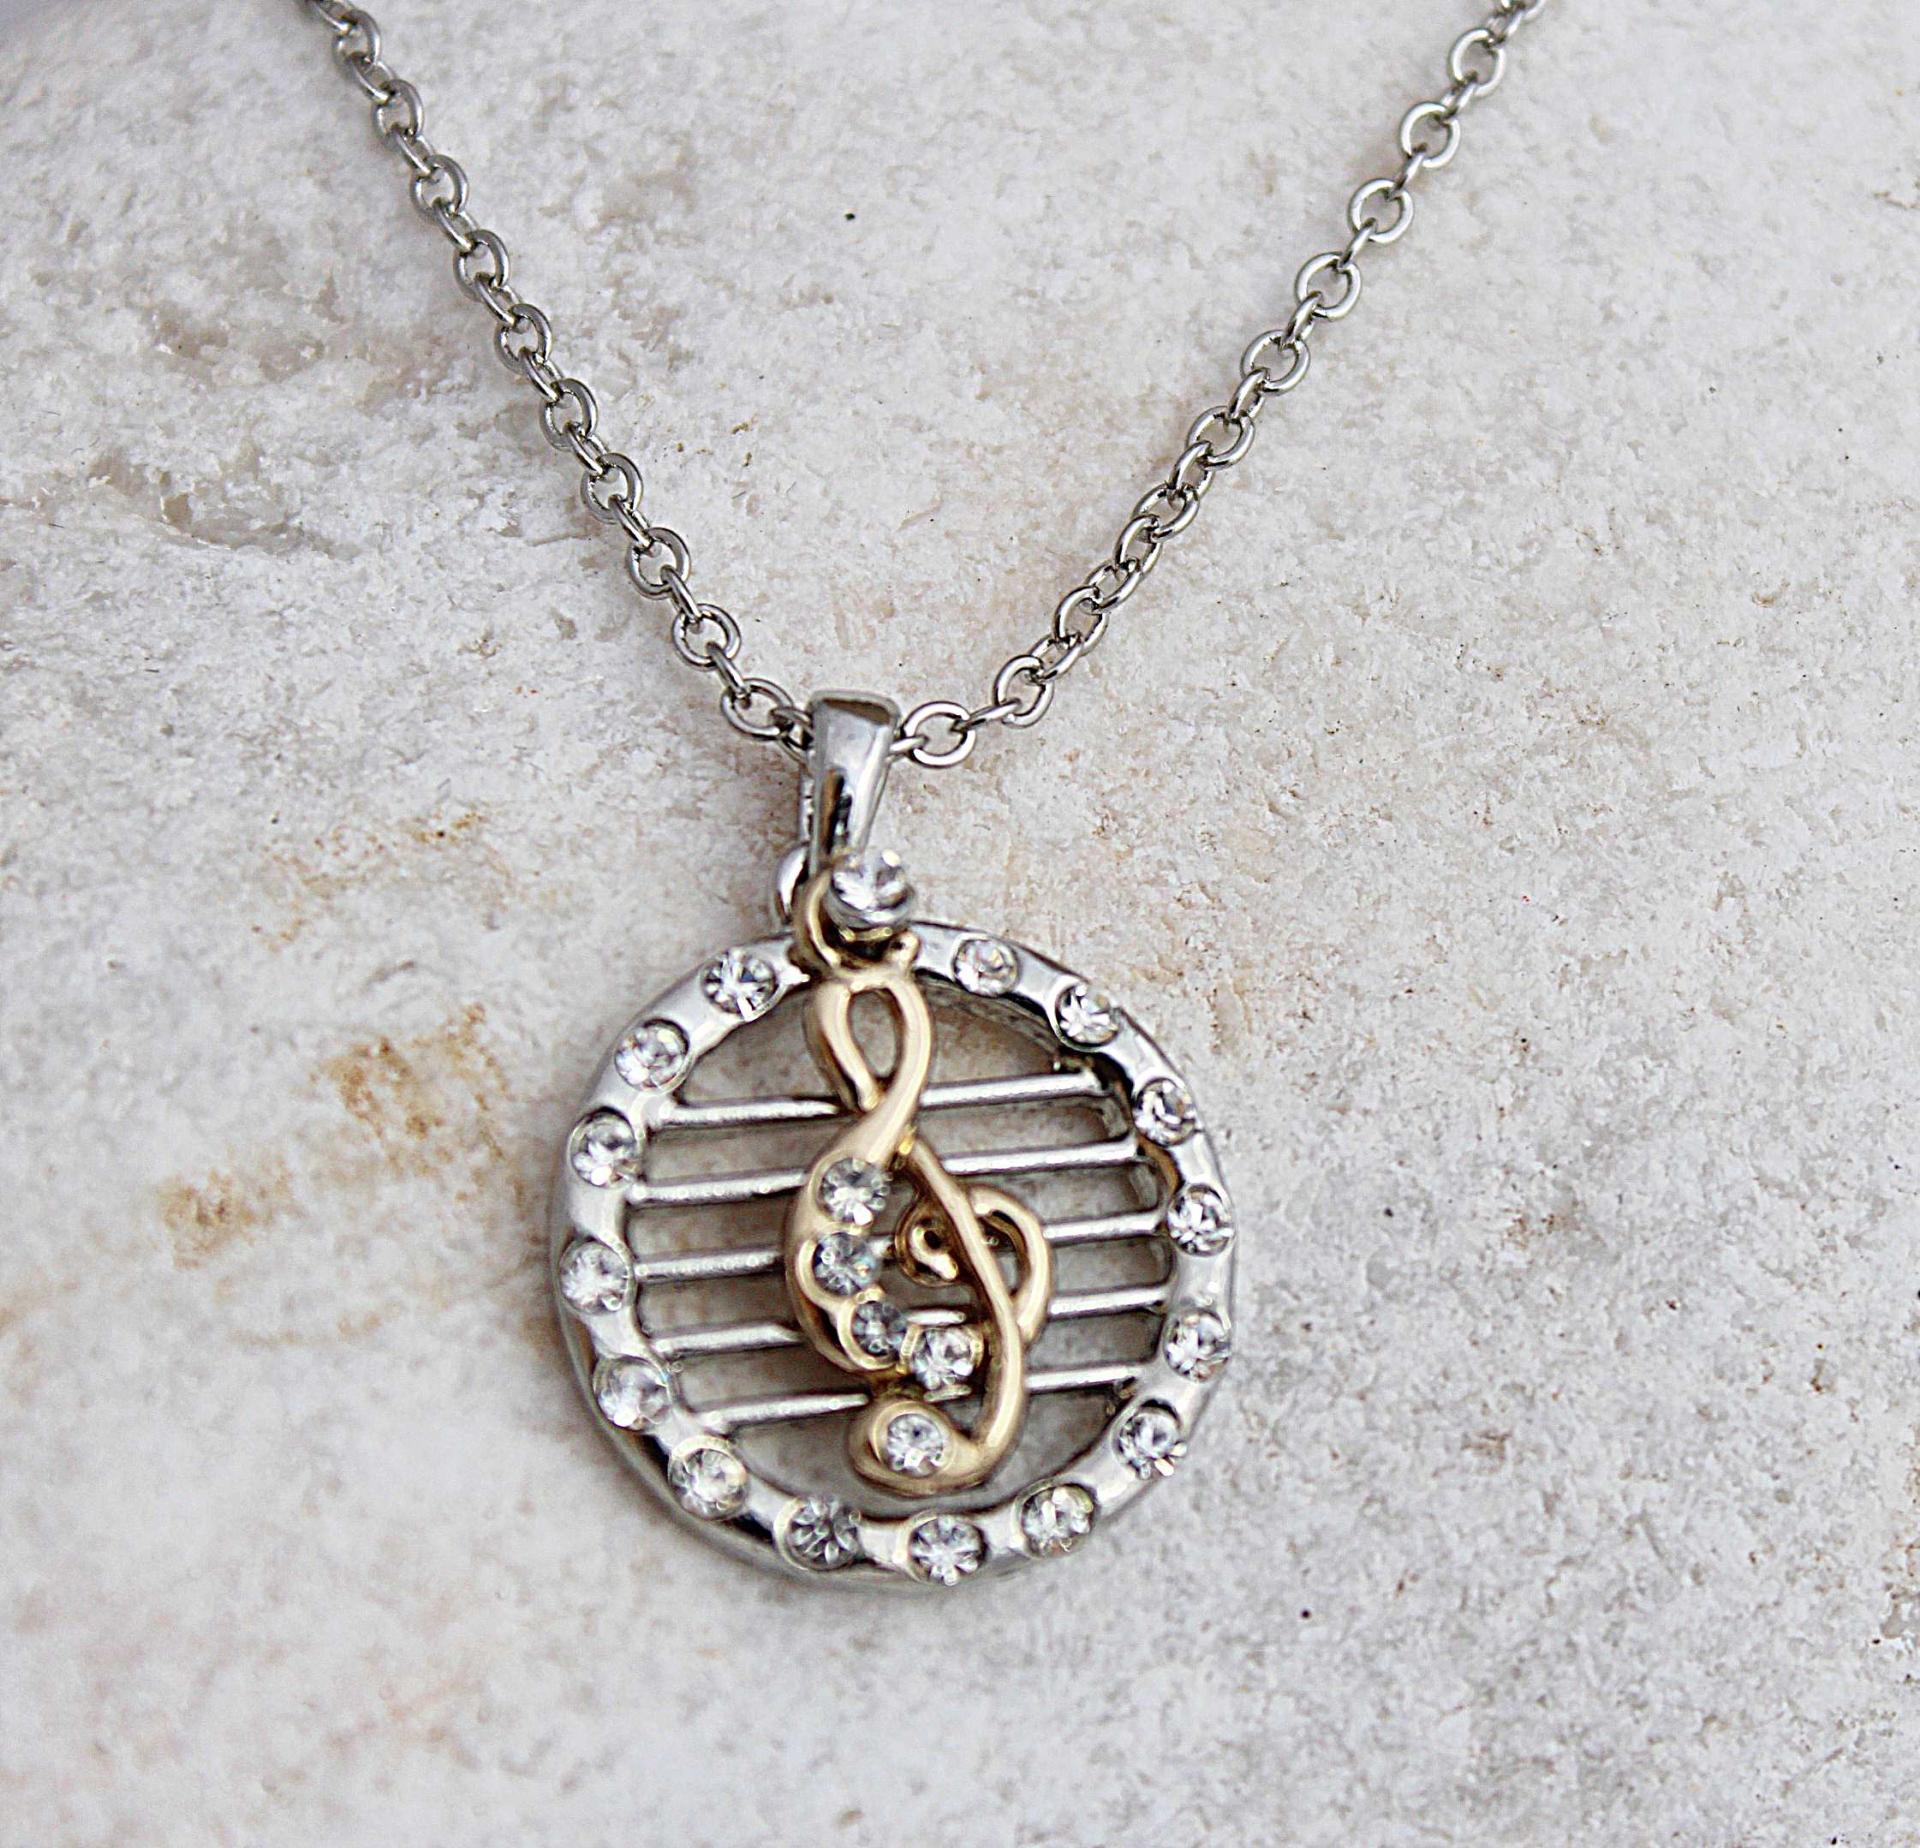 G Clef Staff Music Necklace - 2 Tone Style